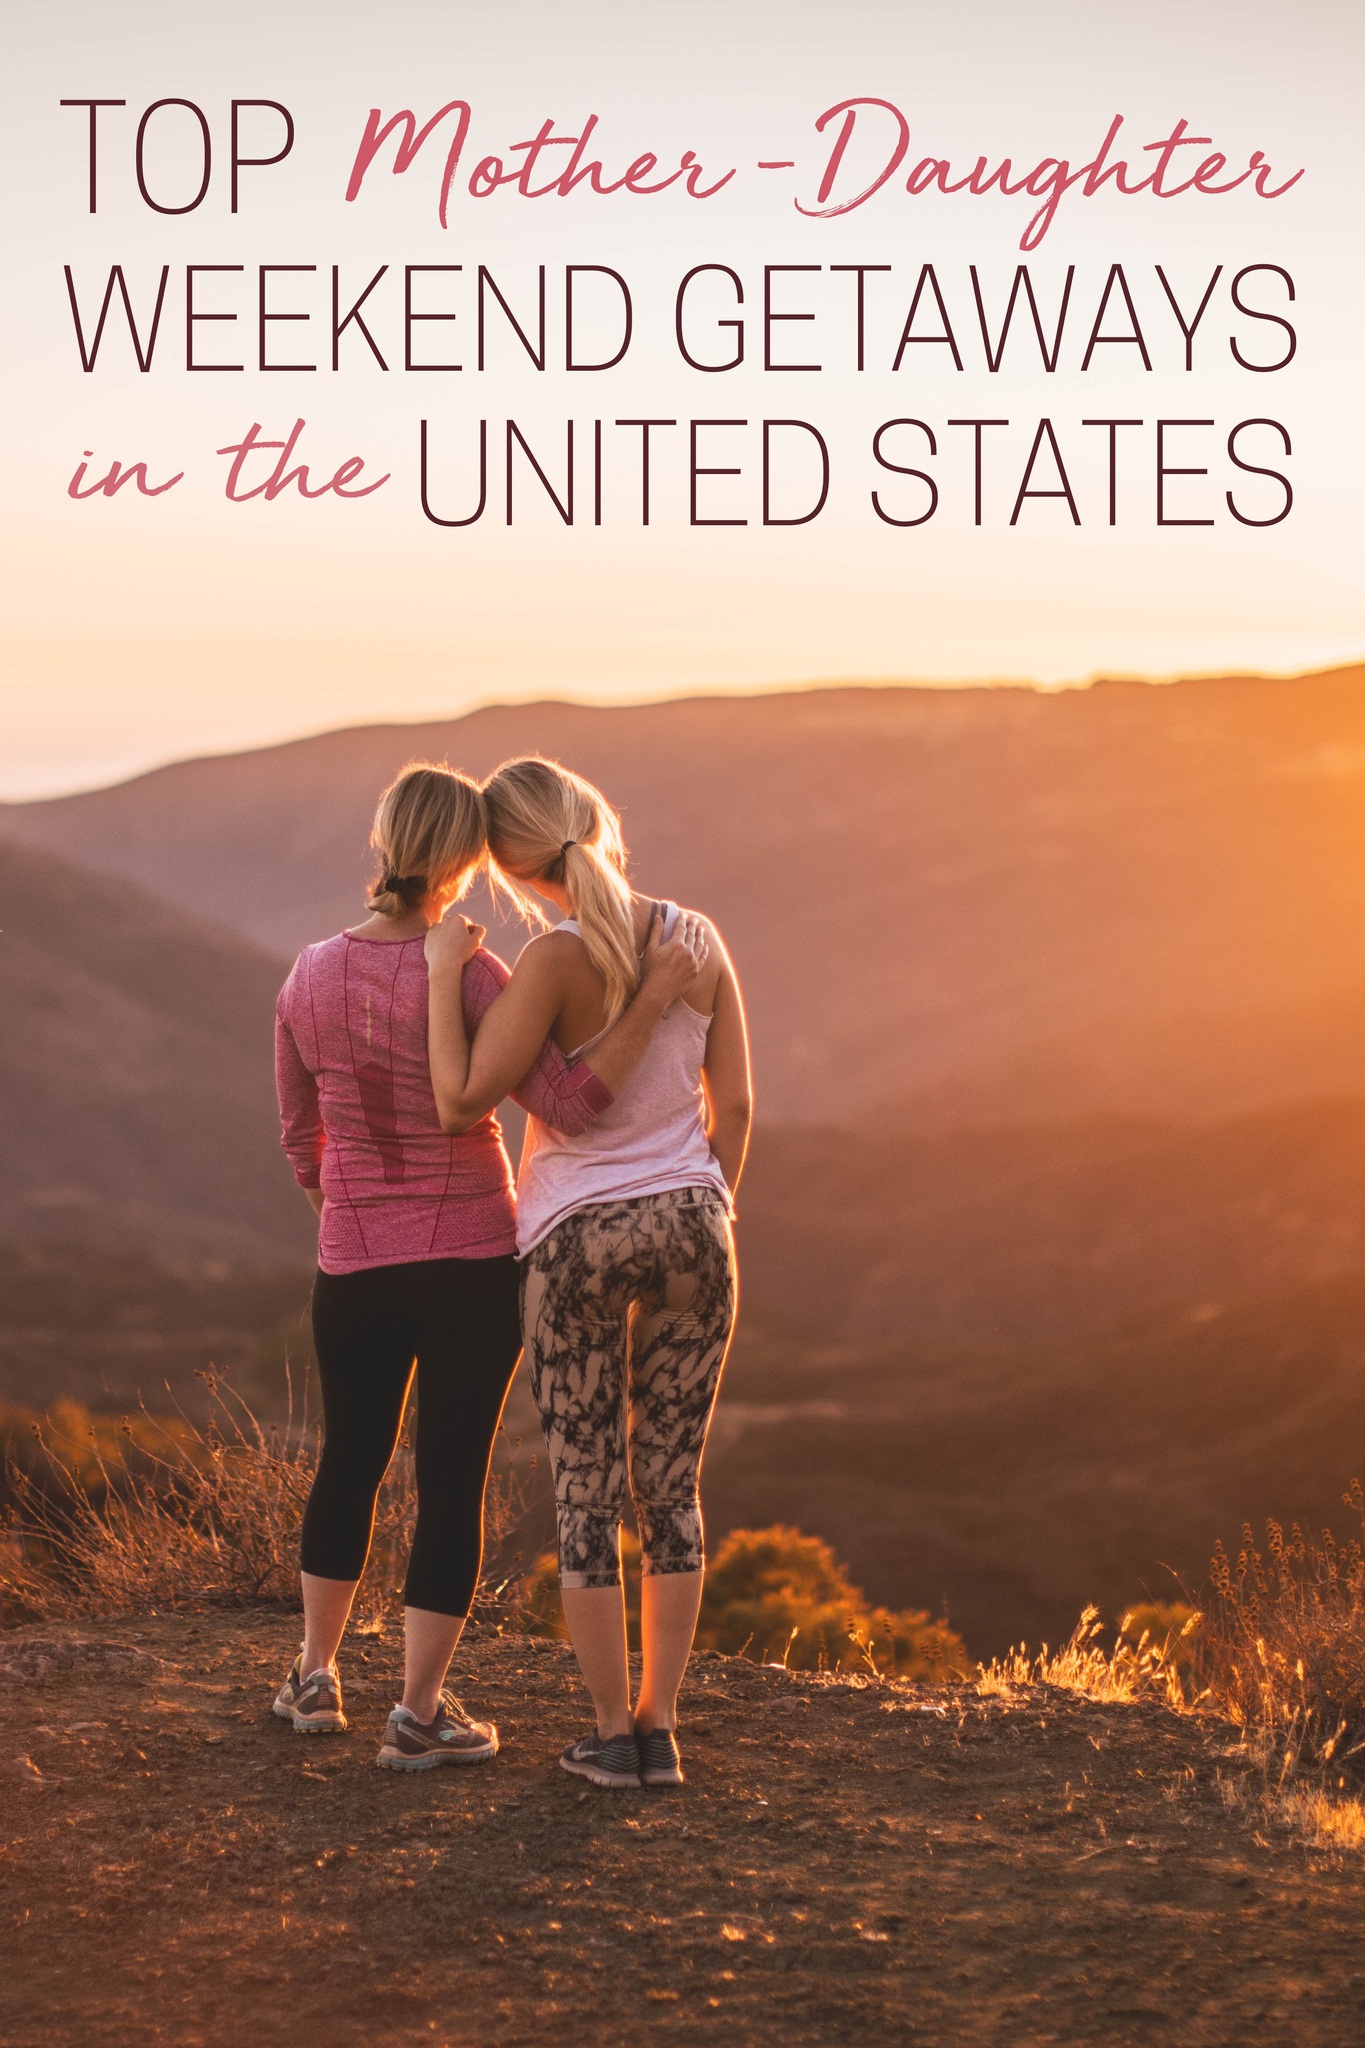 Top Mother Daughter Weekend Getaways in the United States